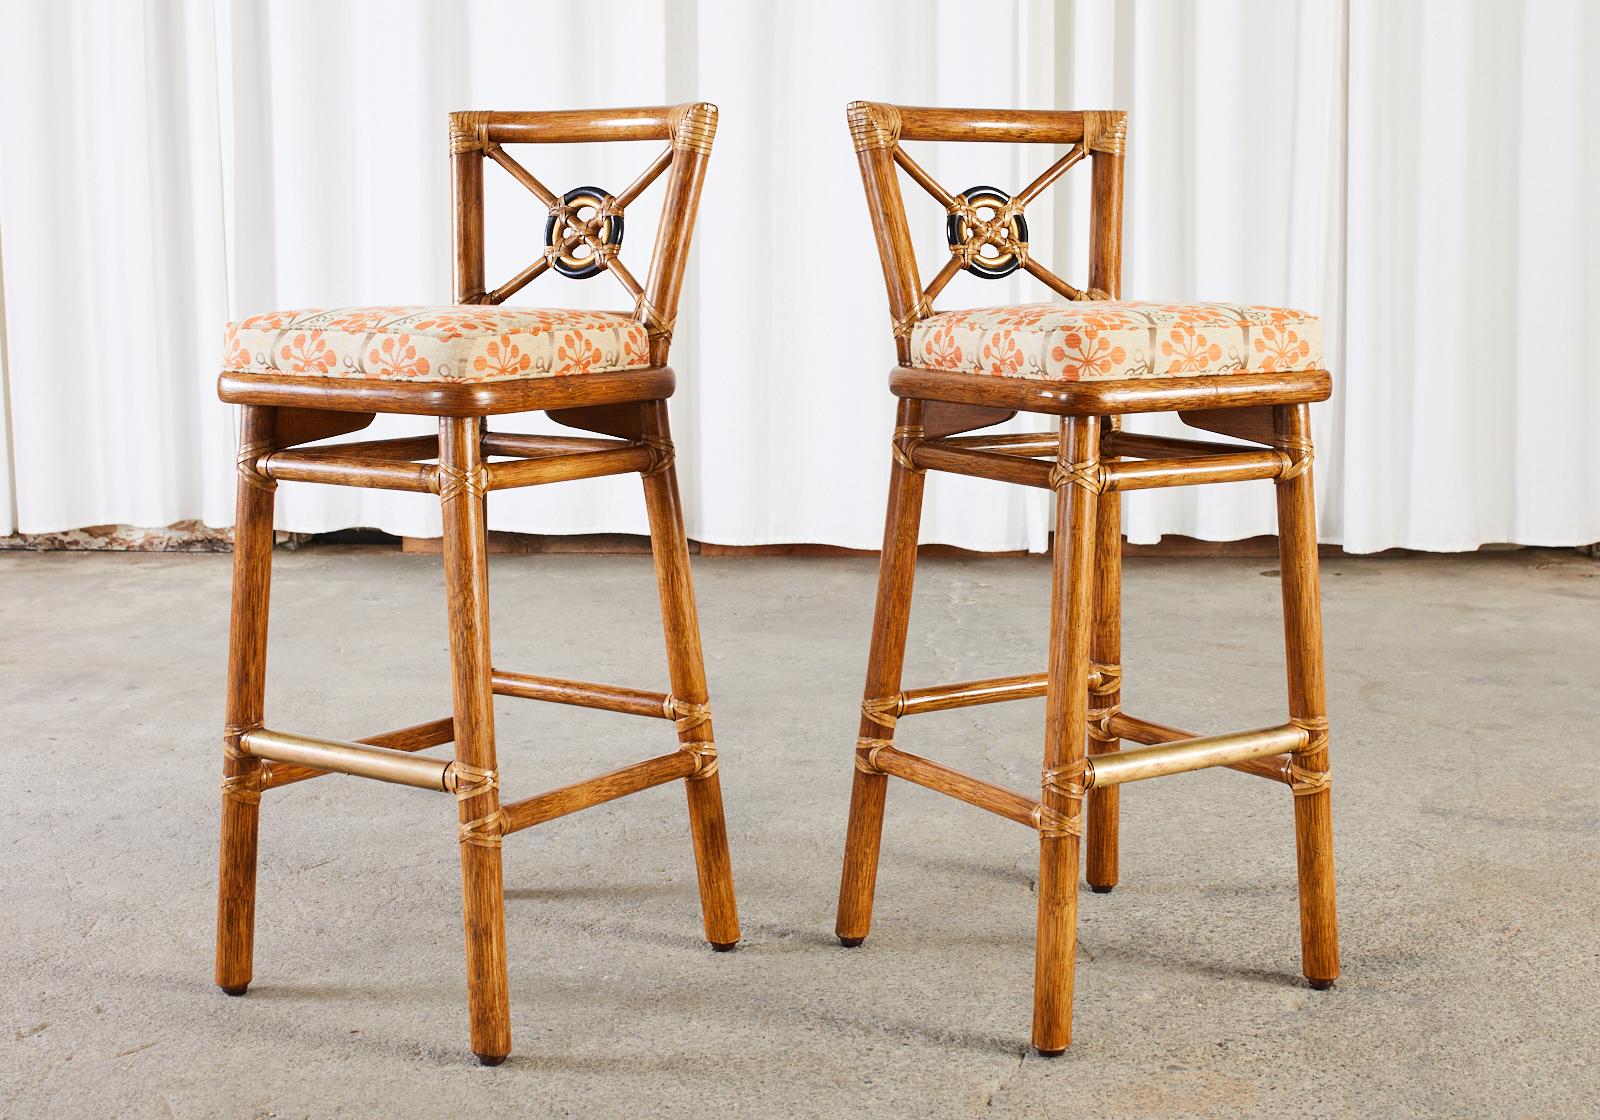 Distinctive pair of rattan barstools made in the California organic modern style by McGuire. Known as target back stools designed by Elinor McGuire featuring the iconic target ring design with optional ring finishes in black and contrasting gilt.